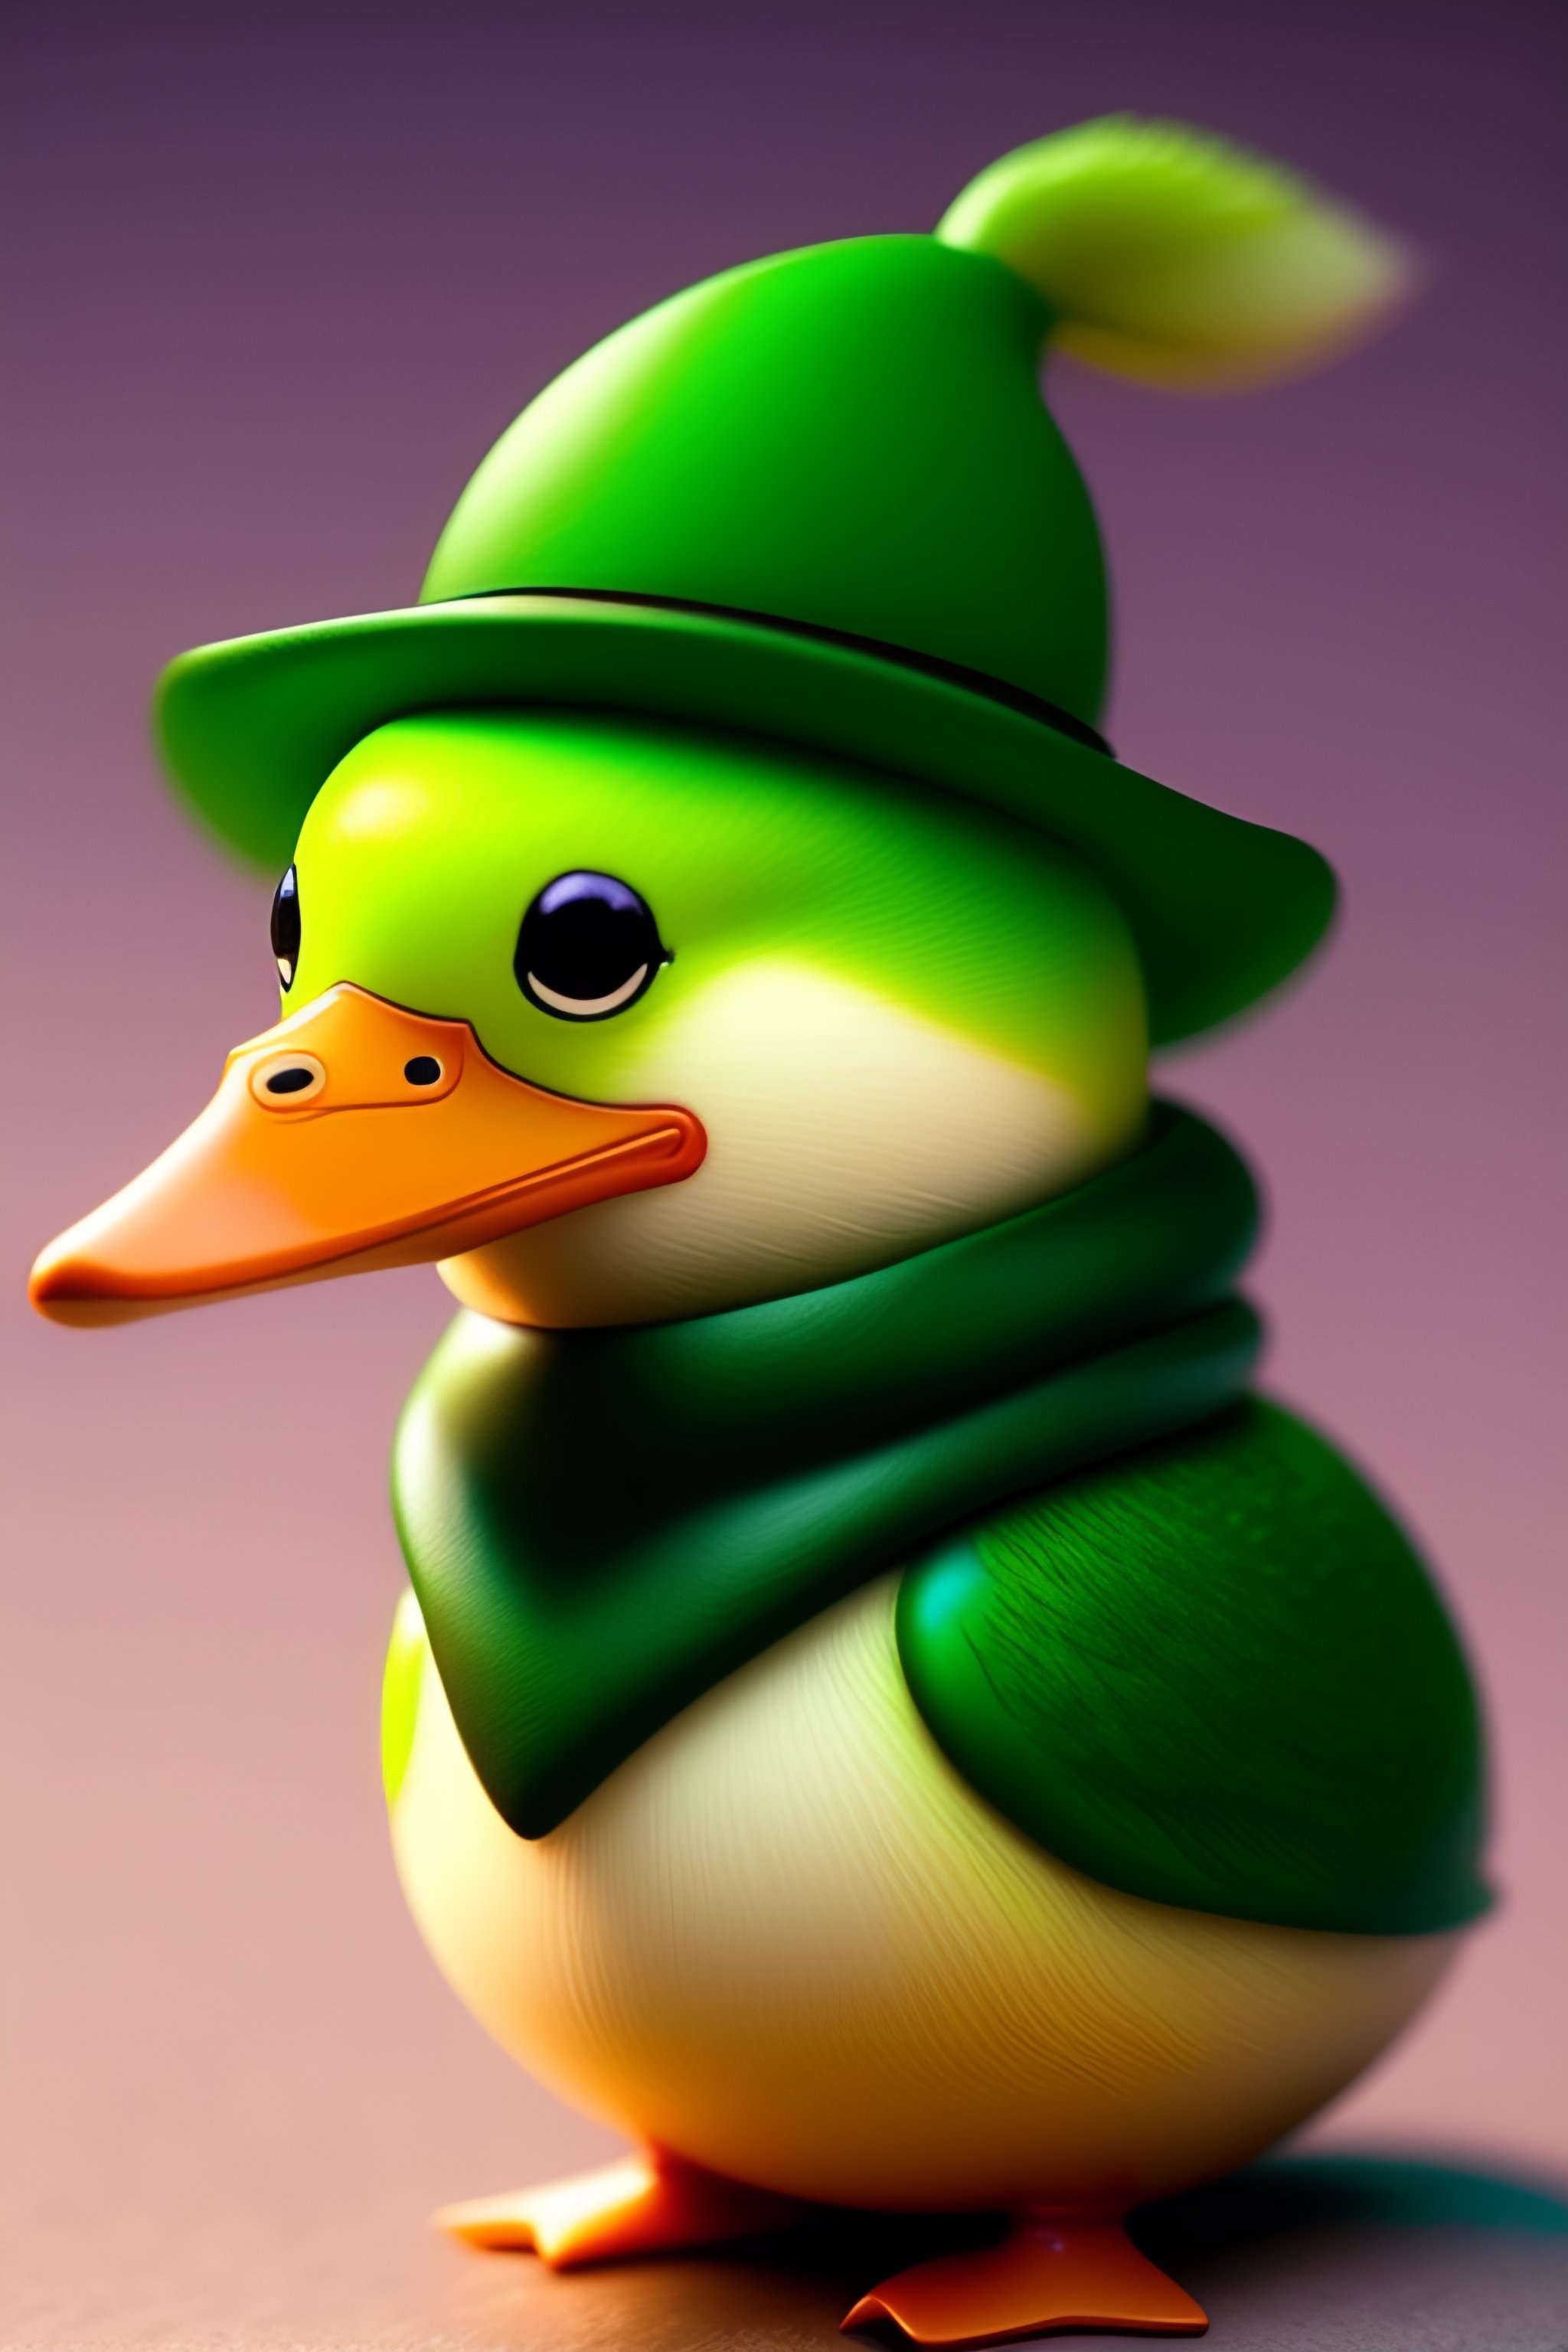 Lexica - A green duck holding a hat, made by hayao miyazaki, anime style